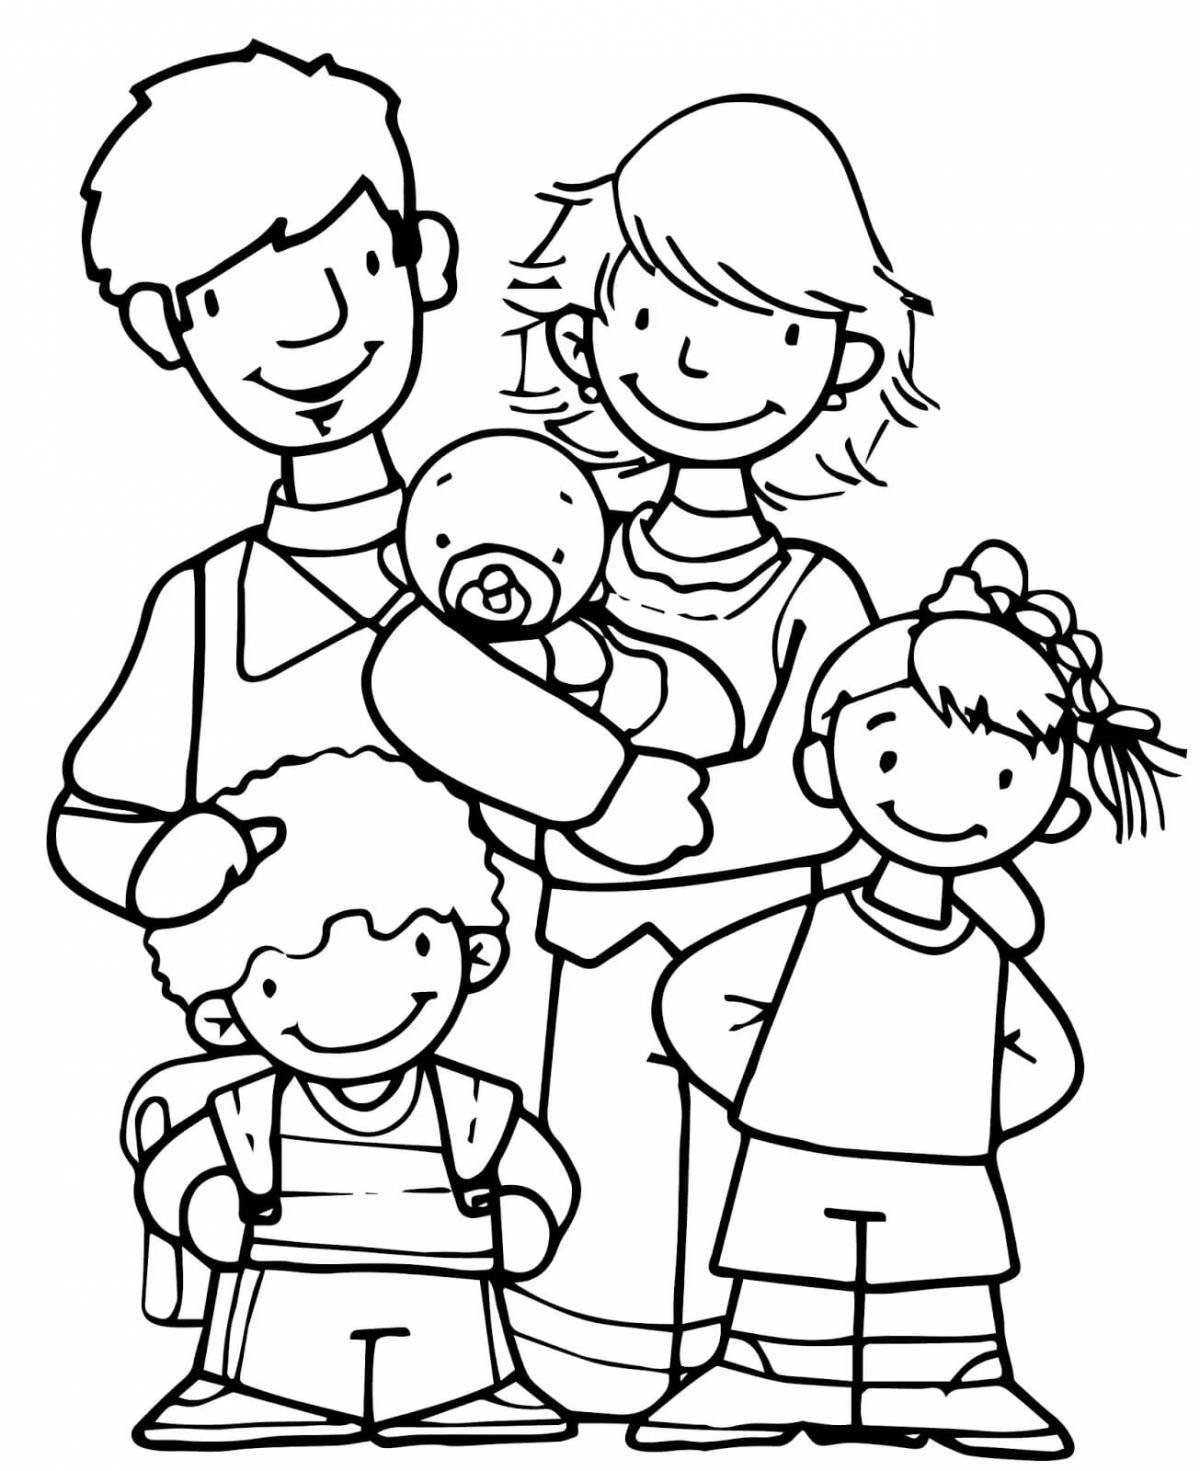 Creative family coloring book for 6-7 year olds